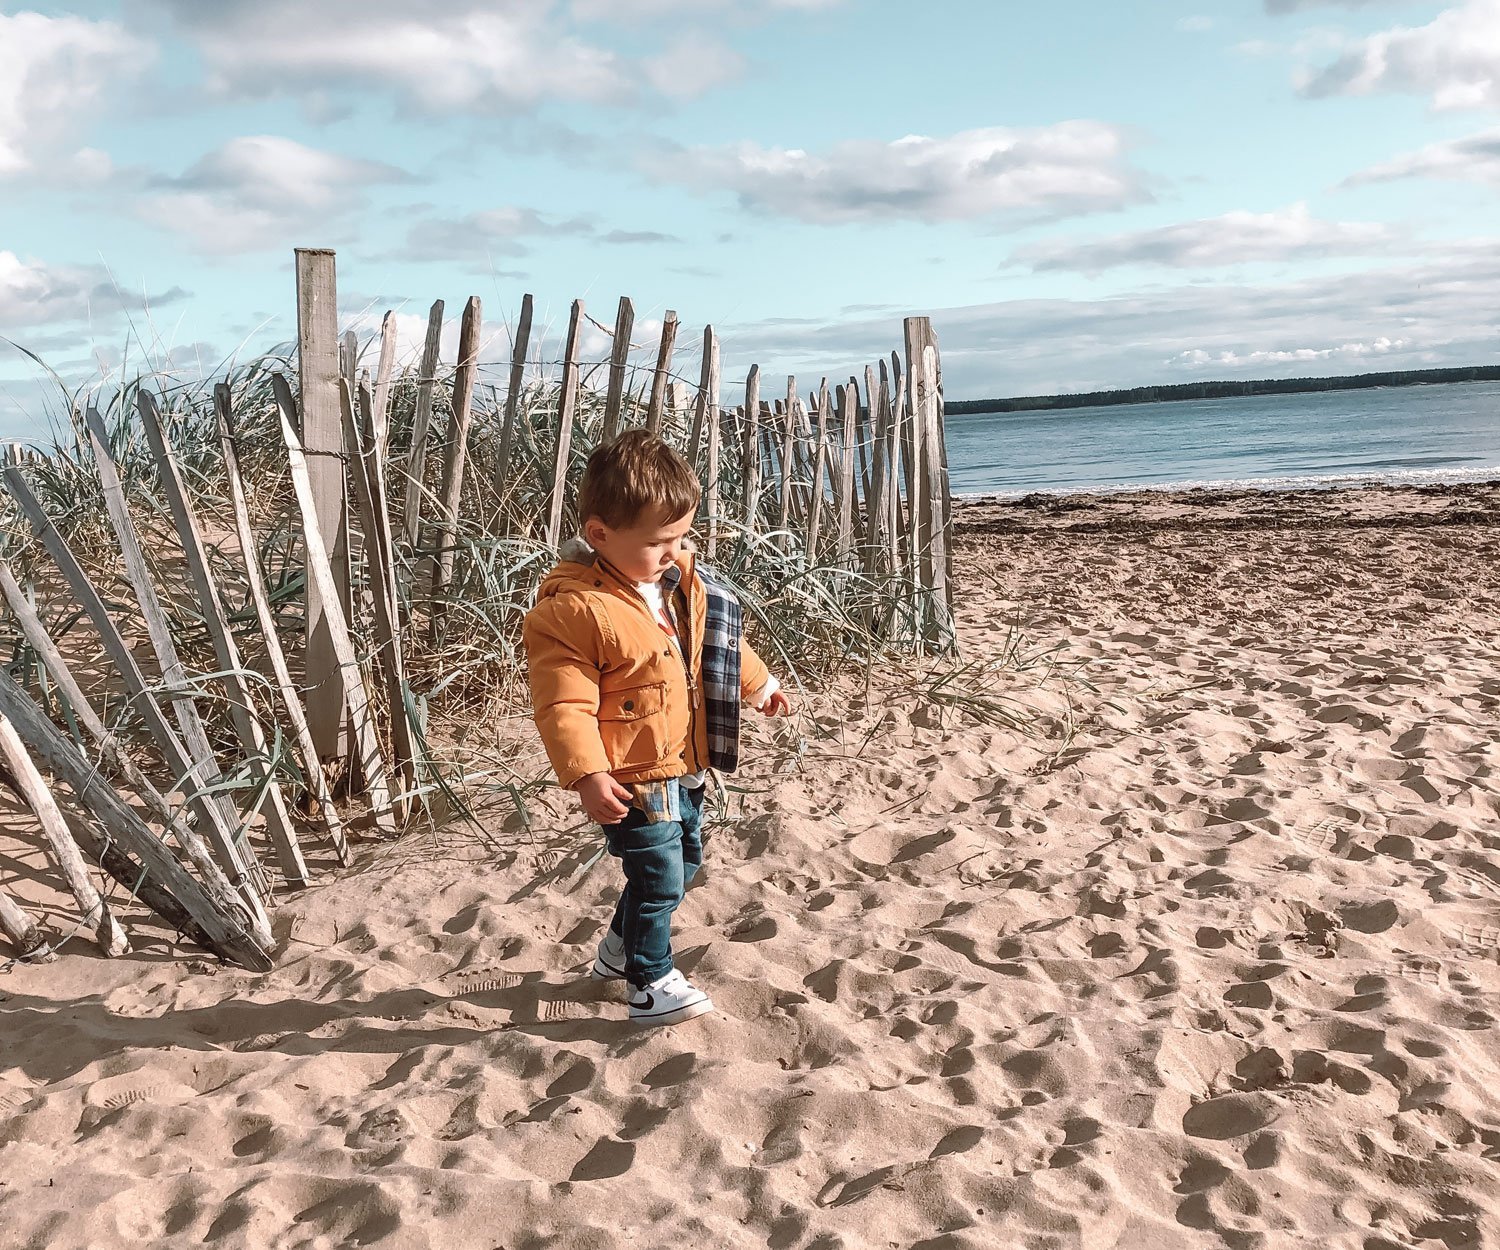 Max on the beach, October 2019